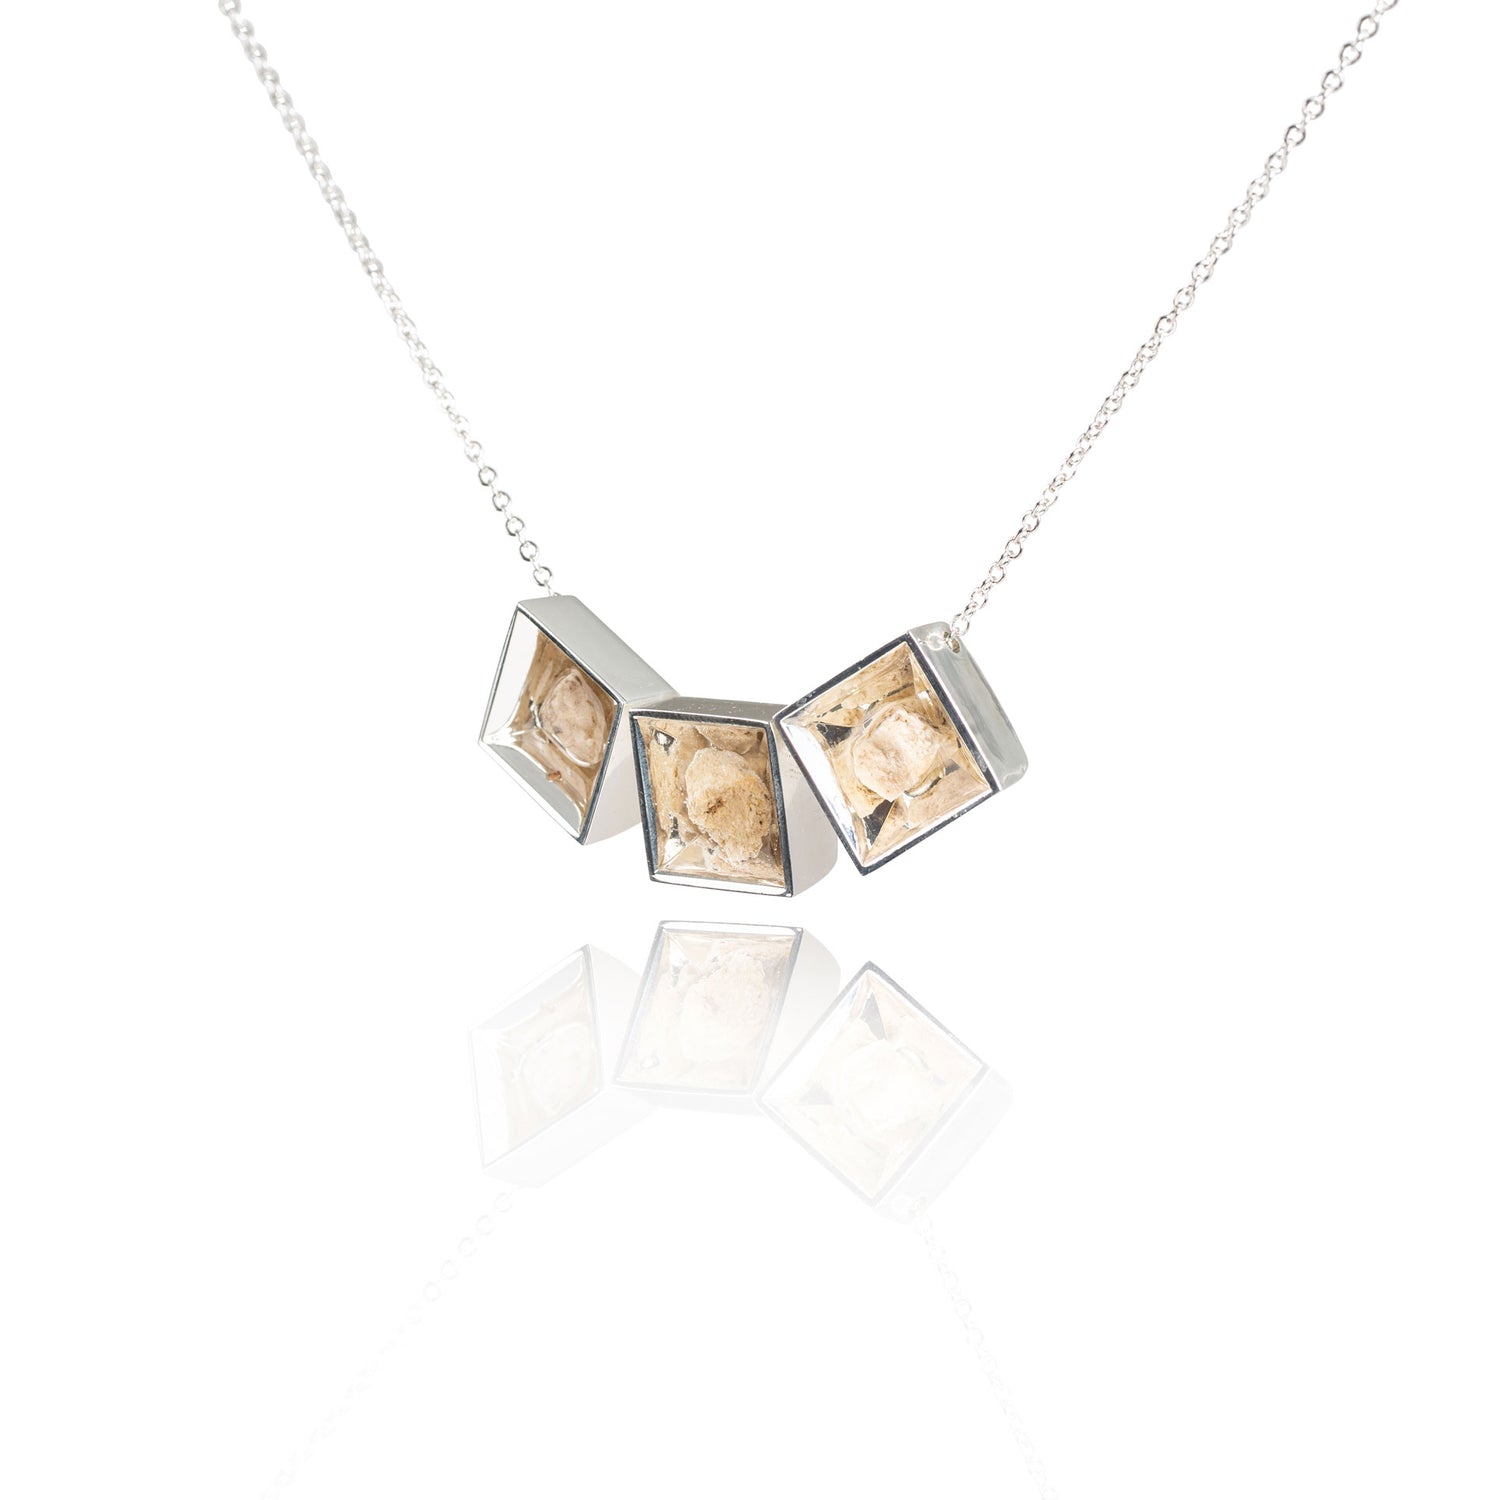 A side view of three small natural tan stones sitting in the middle of three separate square shaped metal pendants in a silver color. The pendants are hanging on a silver chain.